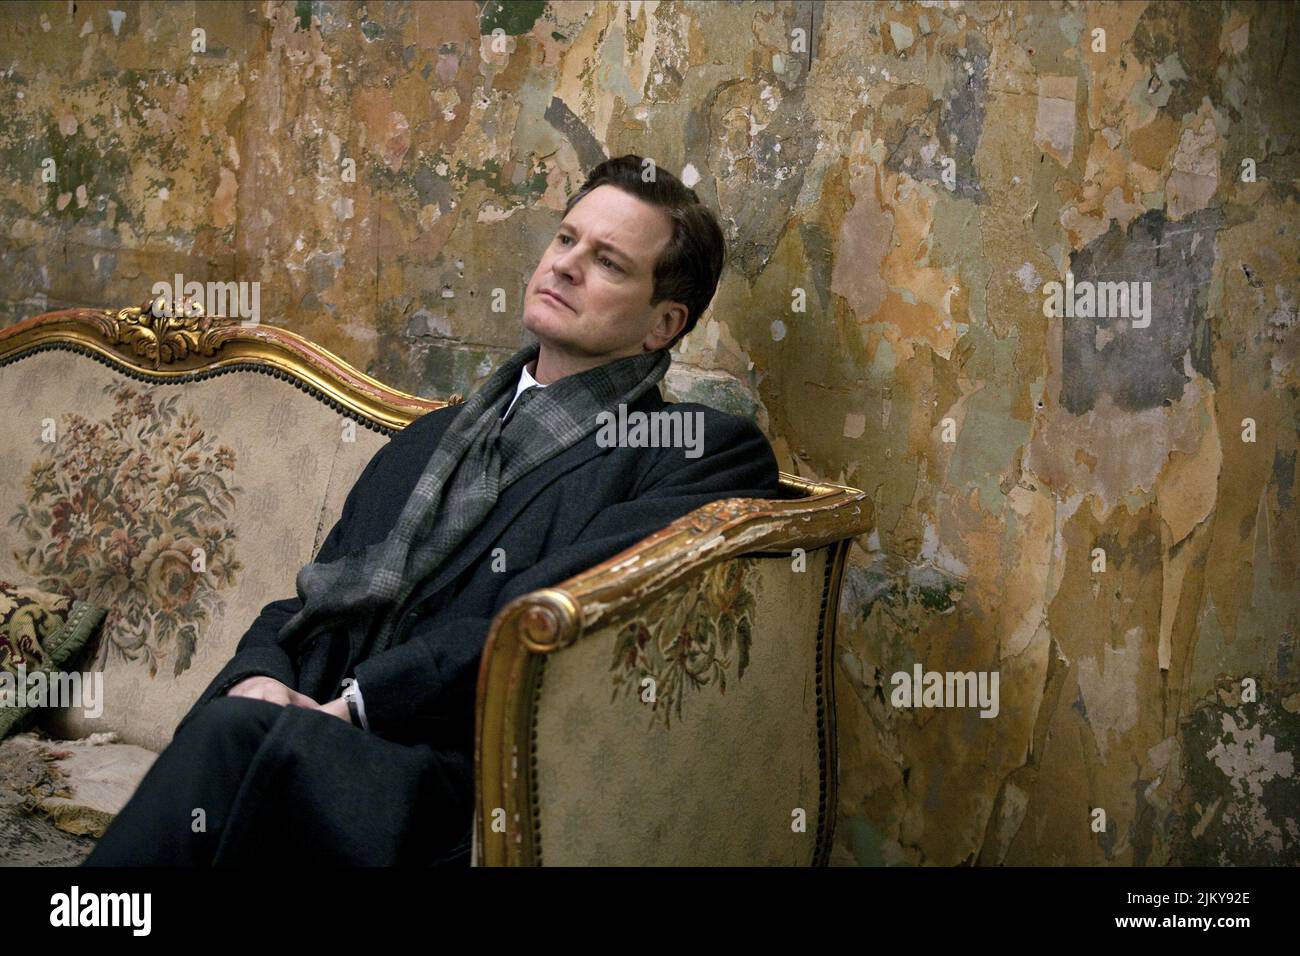 COLIN FIRTH, THE KING'S SPEECH, 2010 Stock Photo